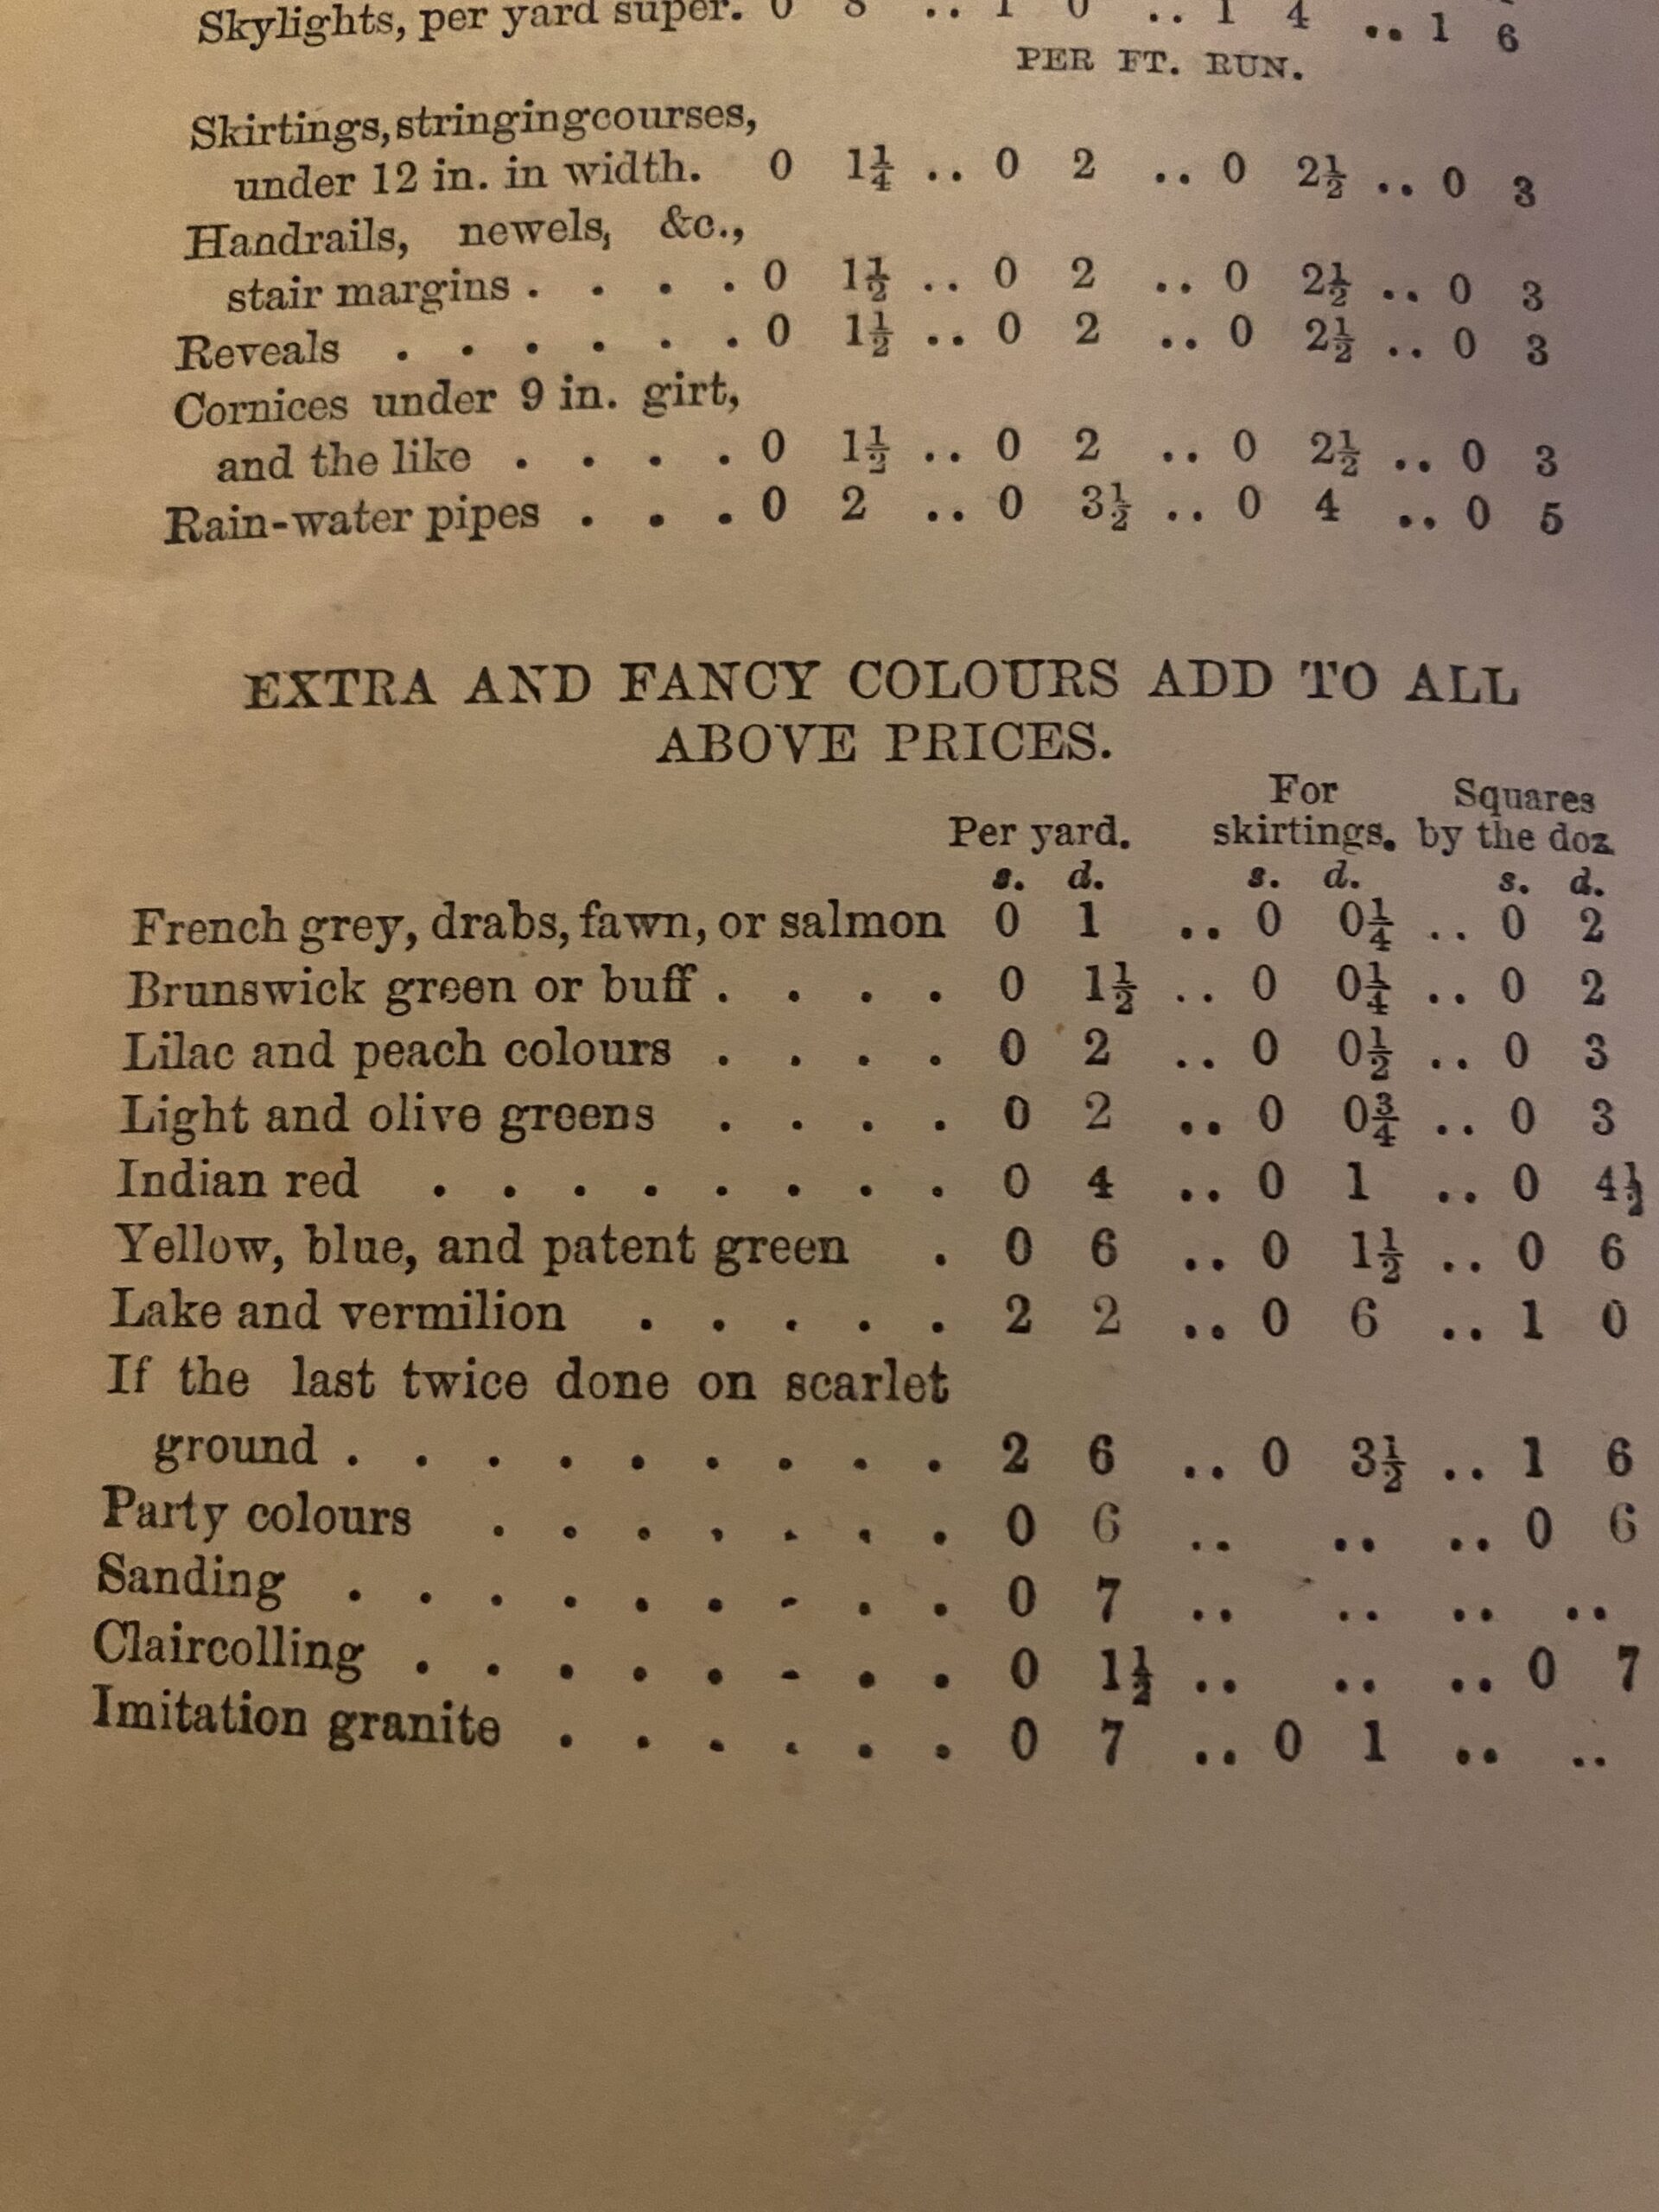 Paint colour prices from A.C Beaton's Quantities and Measurements book dating to 1911.